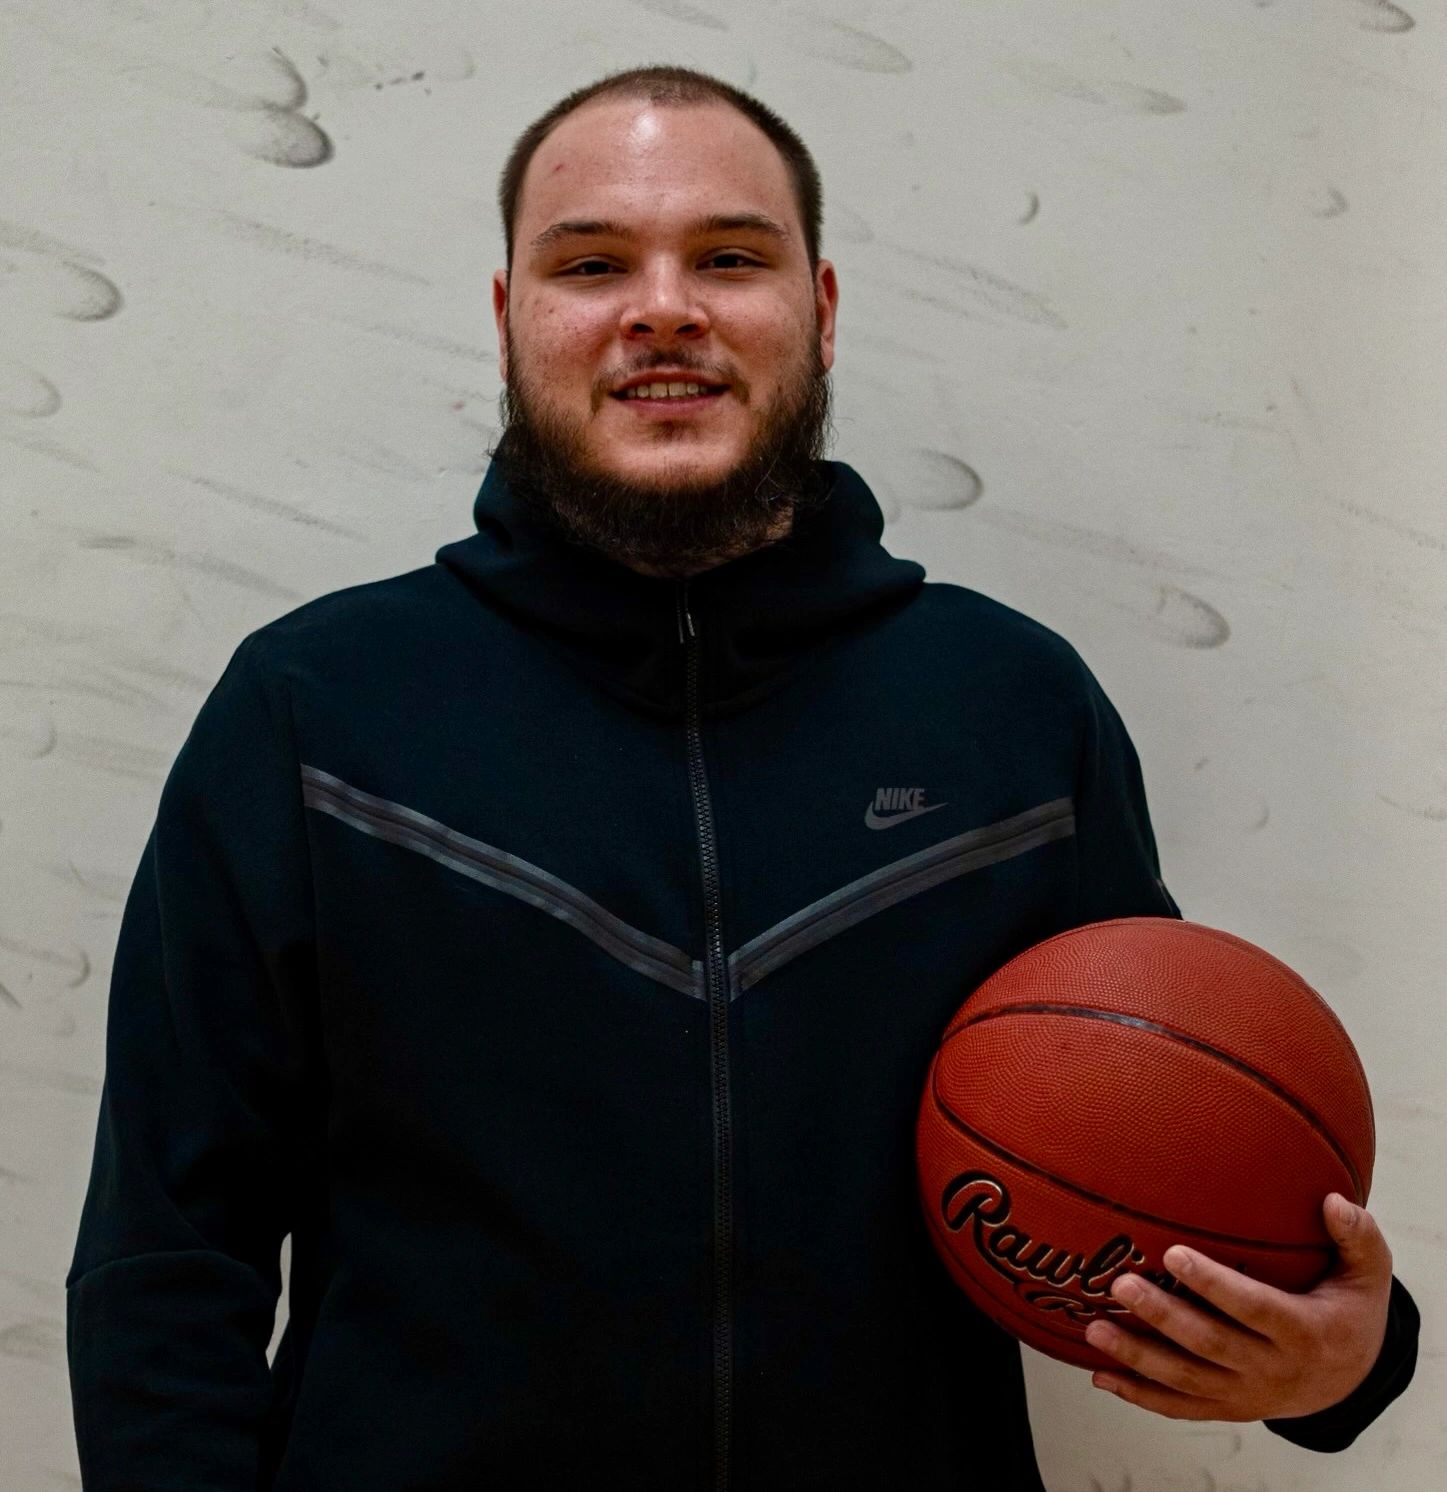 Scott - Basketball Coach for Basketball Summer Camp for kids in downtown Toronto